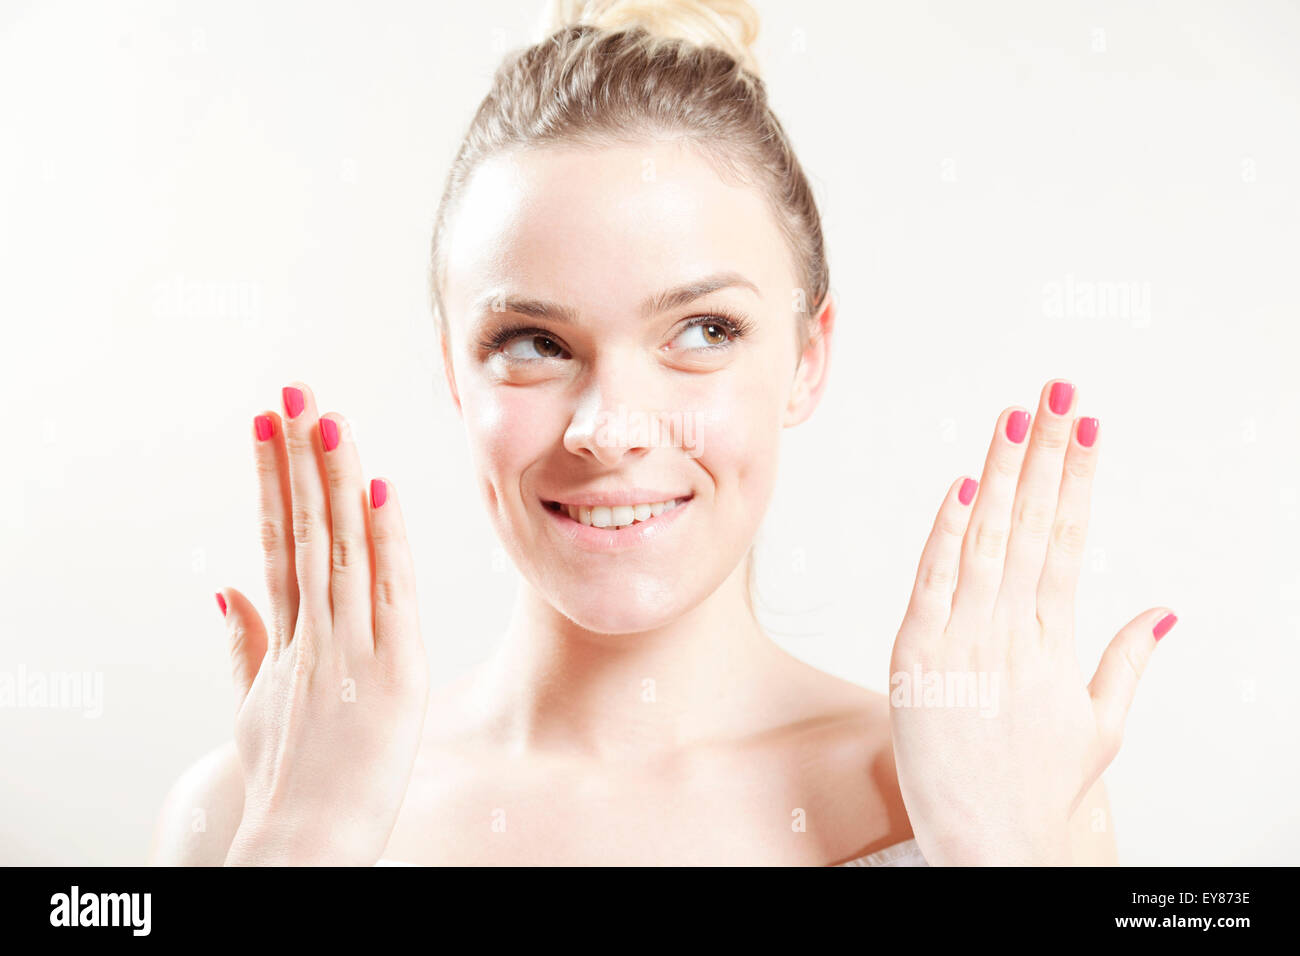 Young woman showing fingernails Stock Photo